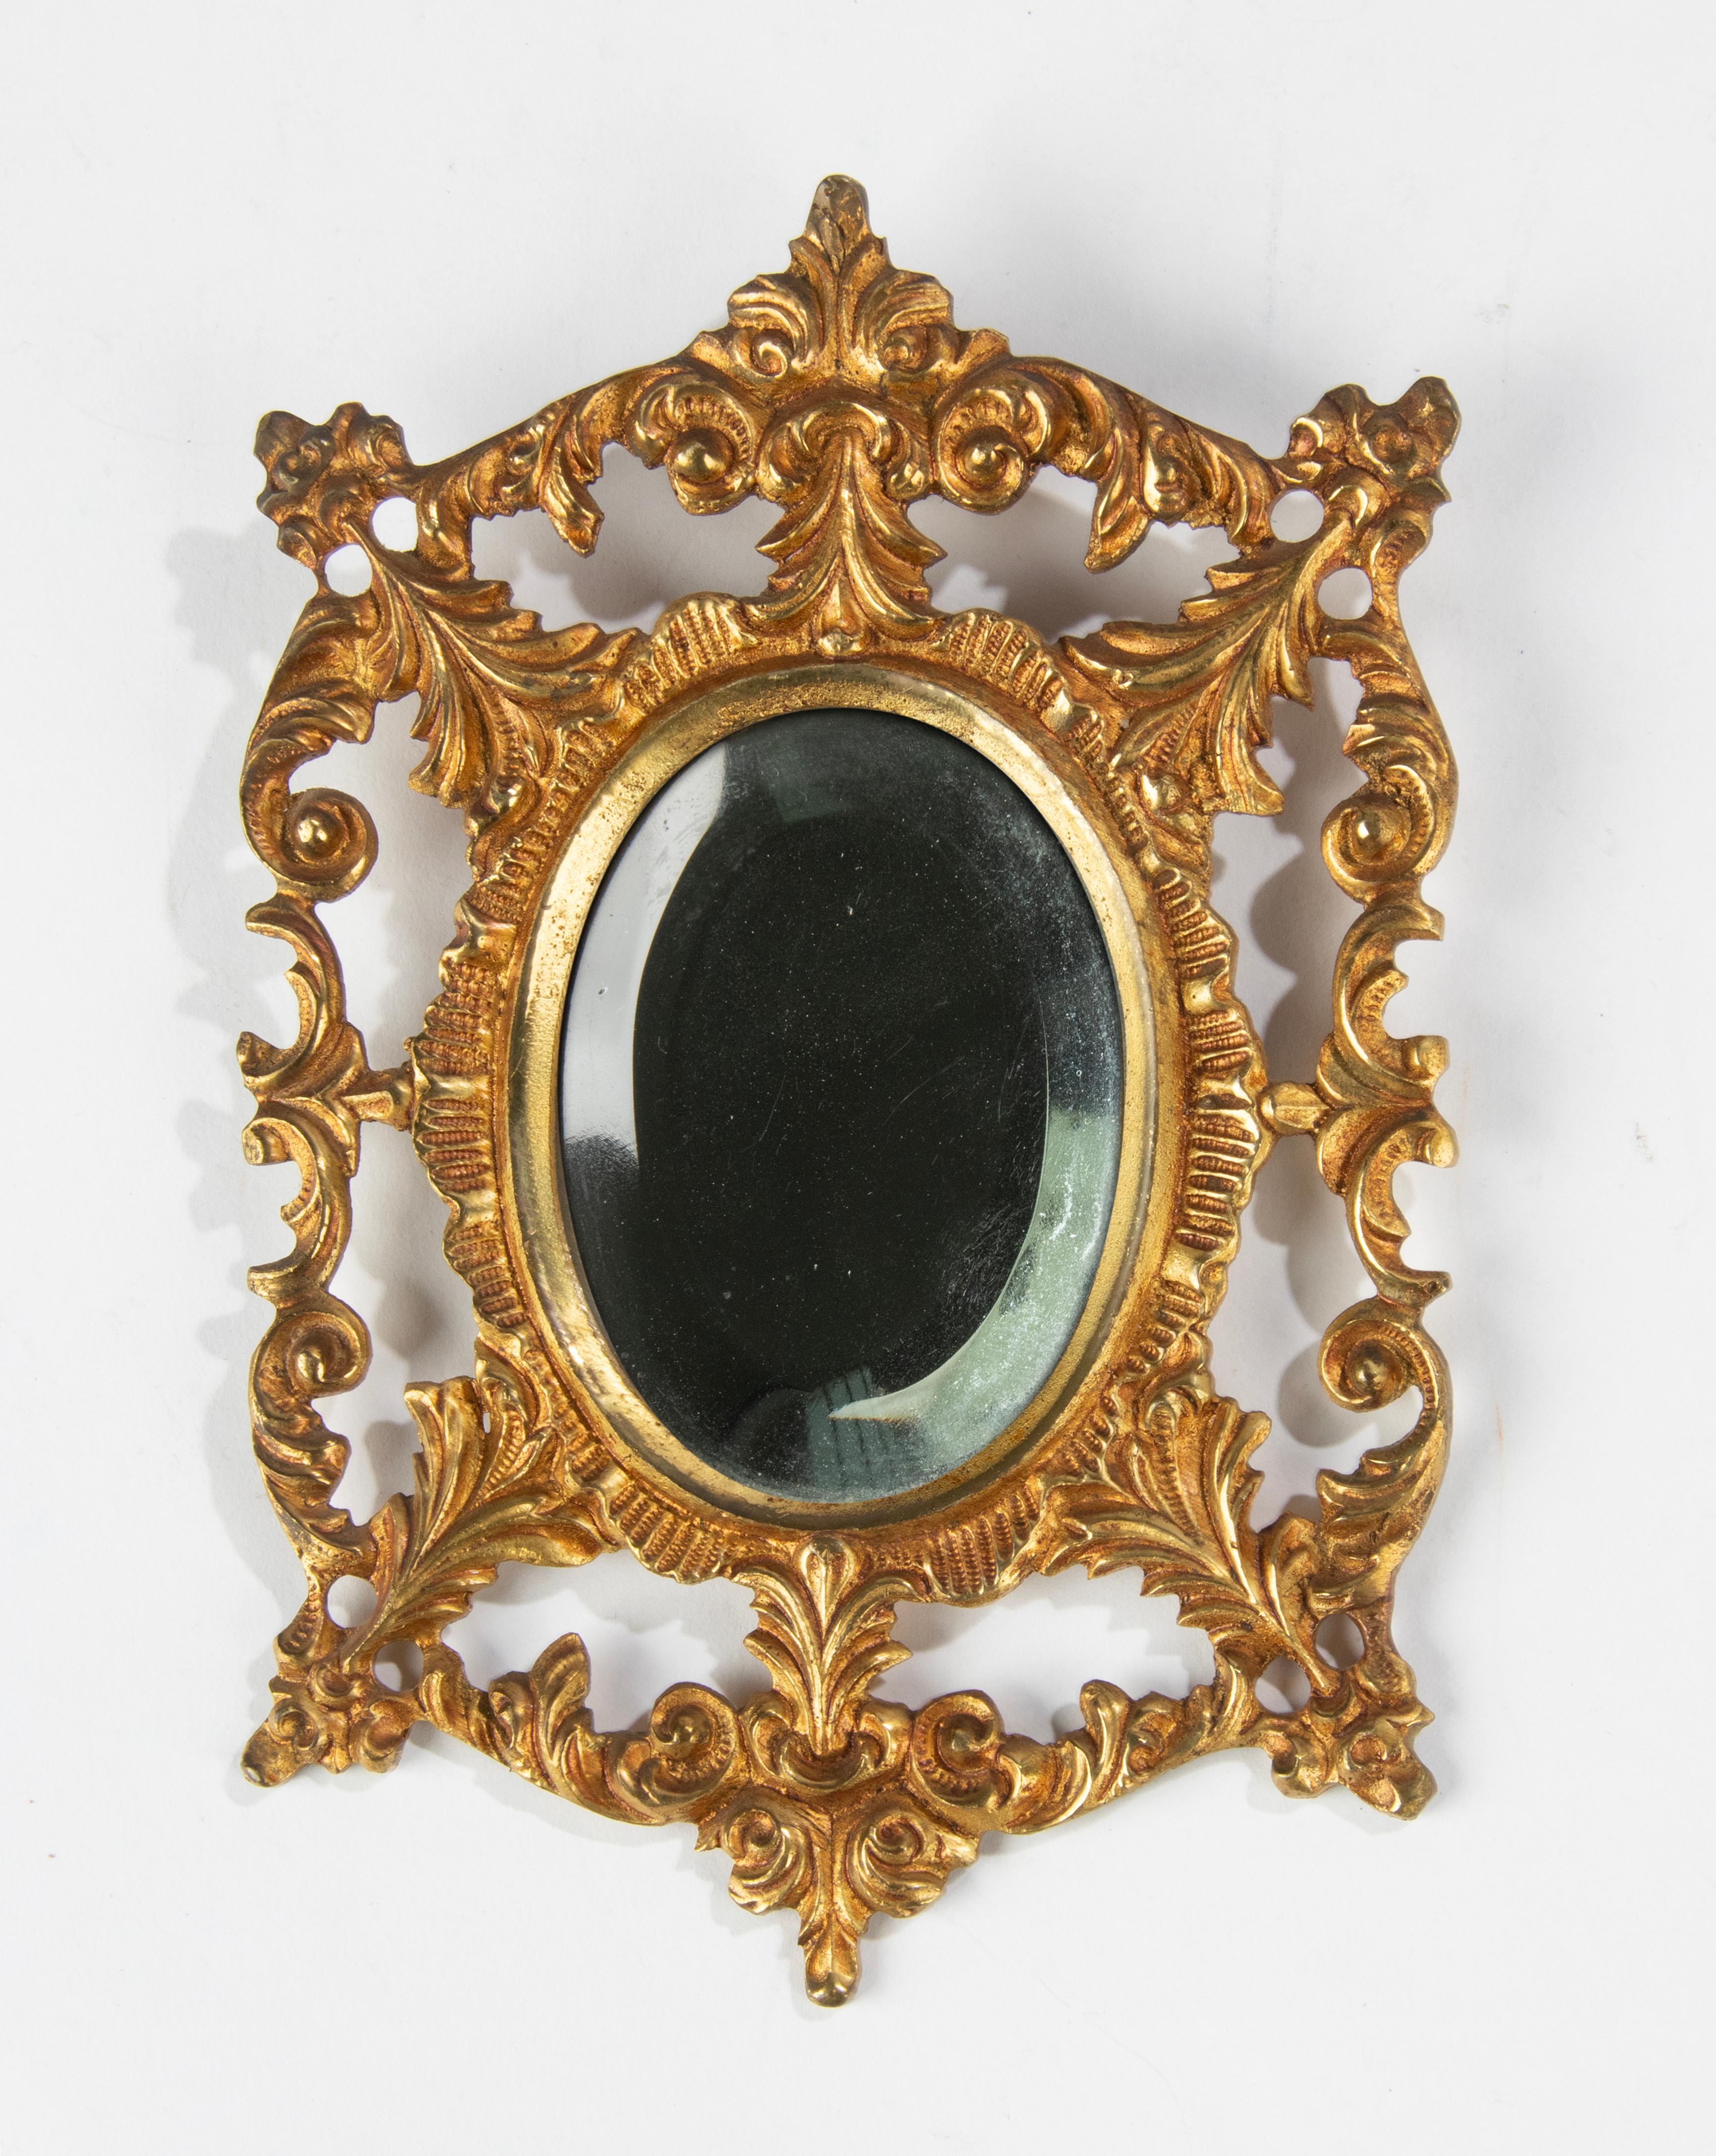 A little antique bronze wall mirror, with a beveled mirror glass. The bronze frame has a cold-gilt patina. Made ink France, circa 1890-1900
Dimensions: 17 (h) x 11 x 1 cm.
 